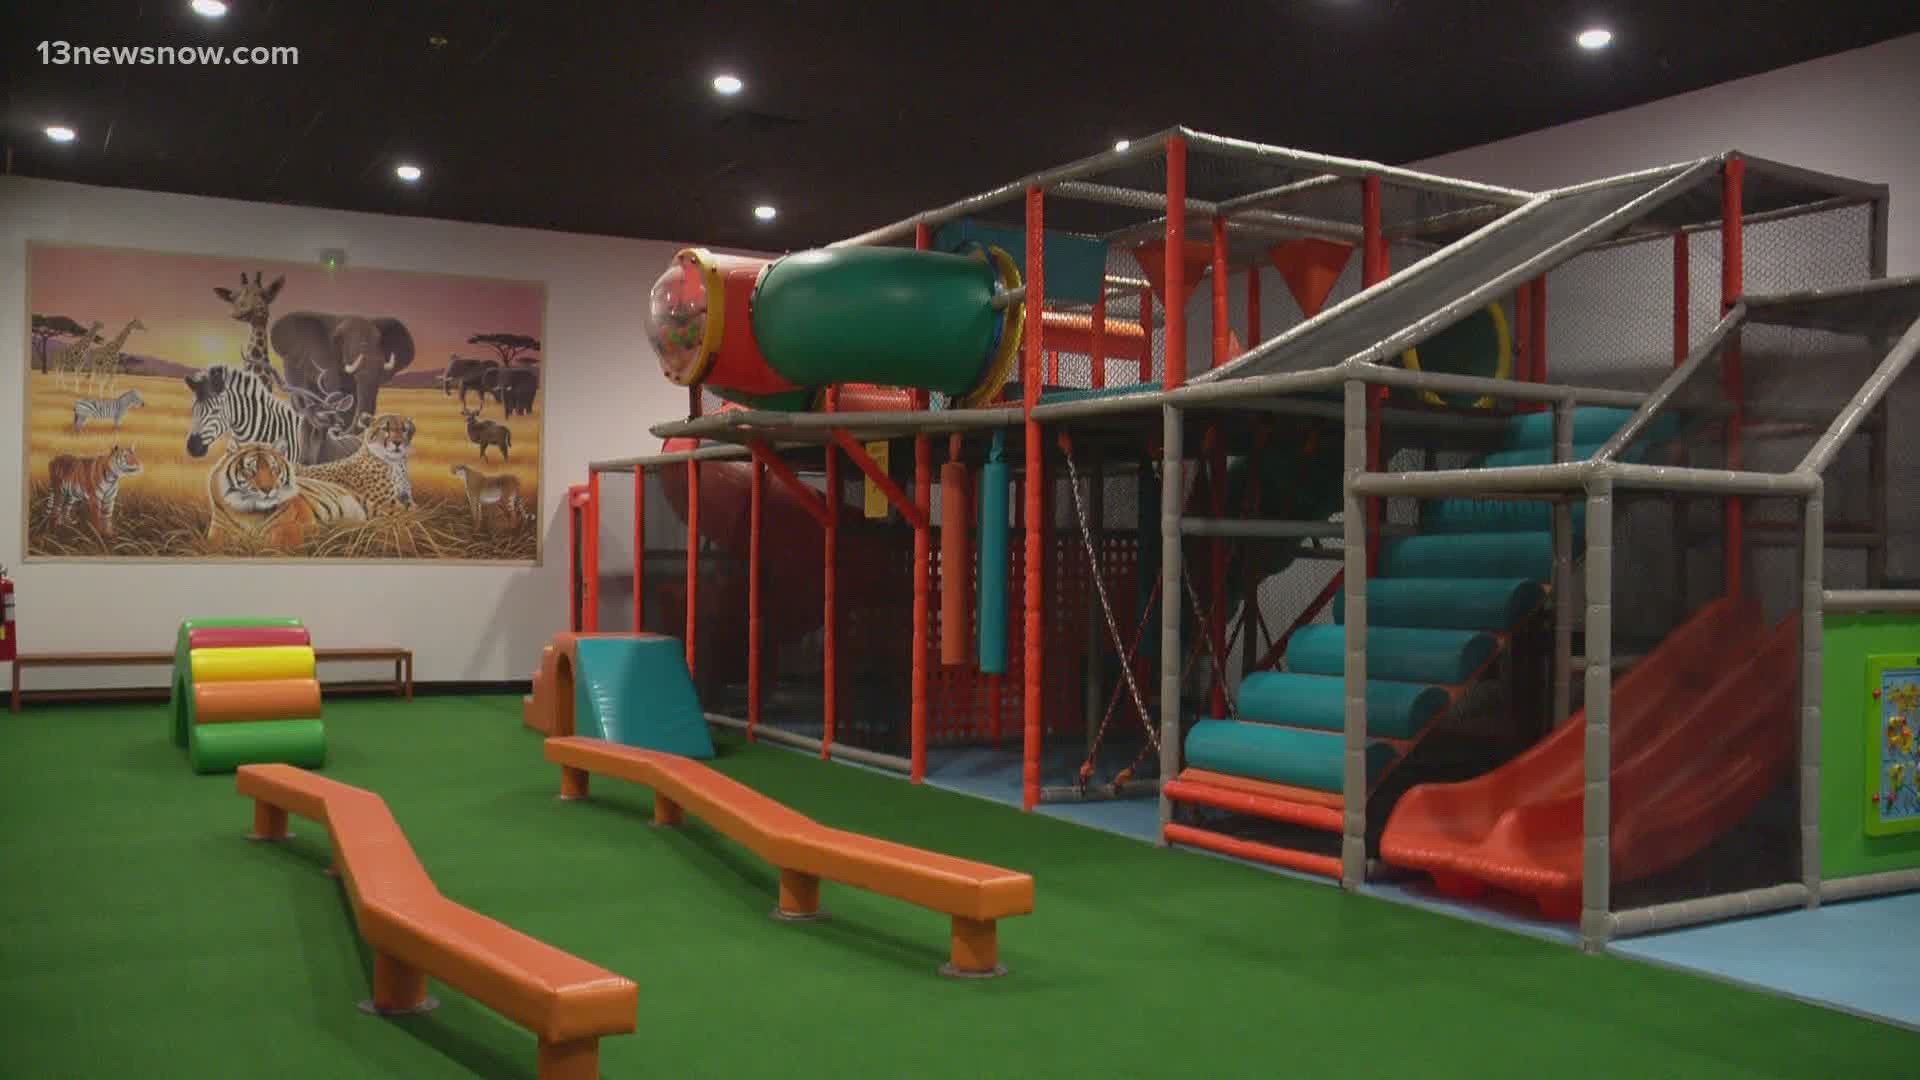 SK8 House Family Entertainment Center is a new family-friendly business that just opened in Virginia Beach.